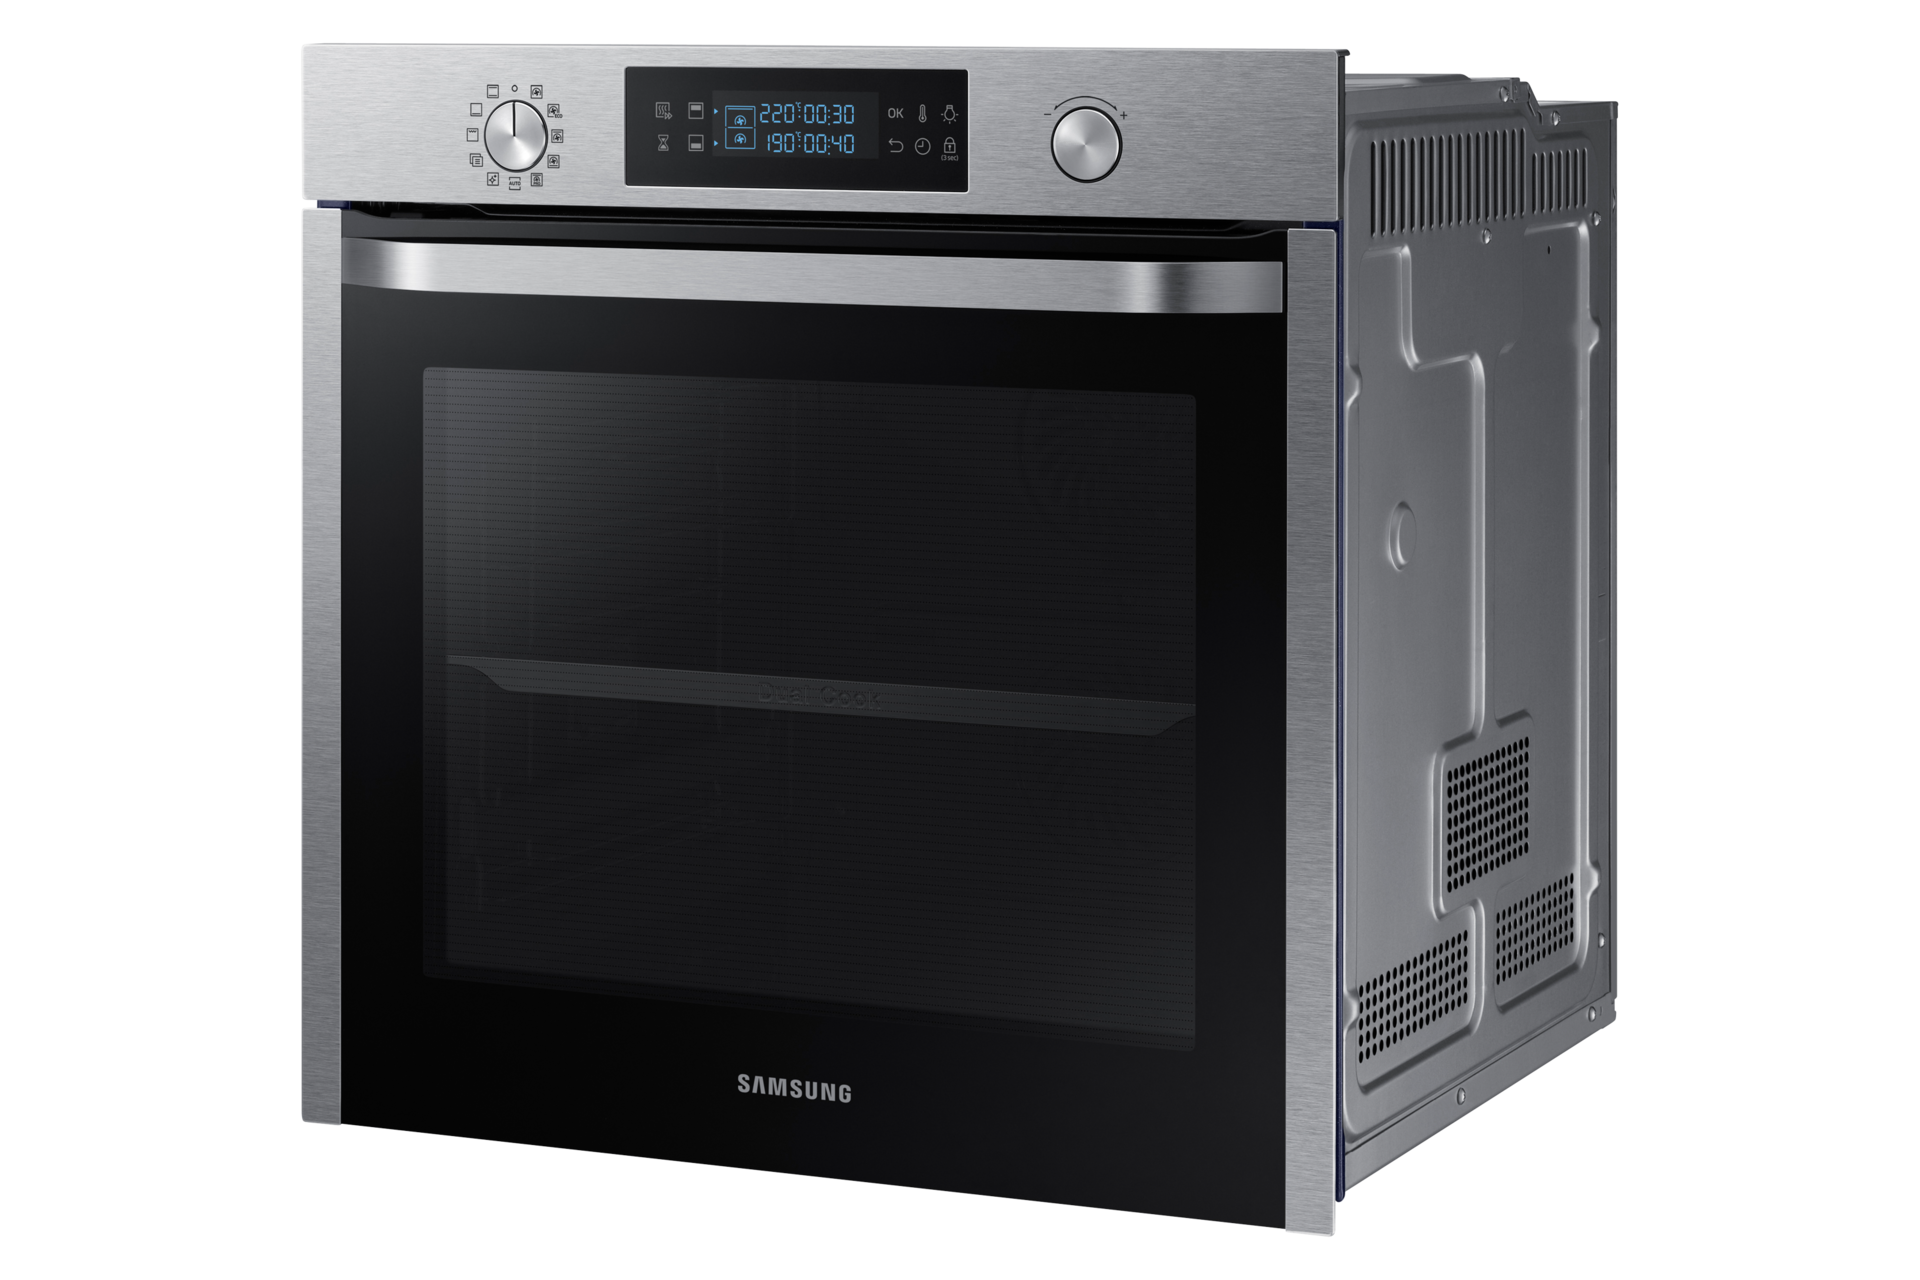 NV9900J Electric Oven with Dual Cook, 75L | PKG700/FA | Samsung South ...